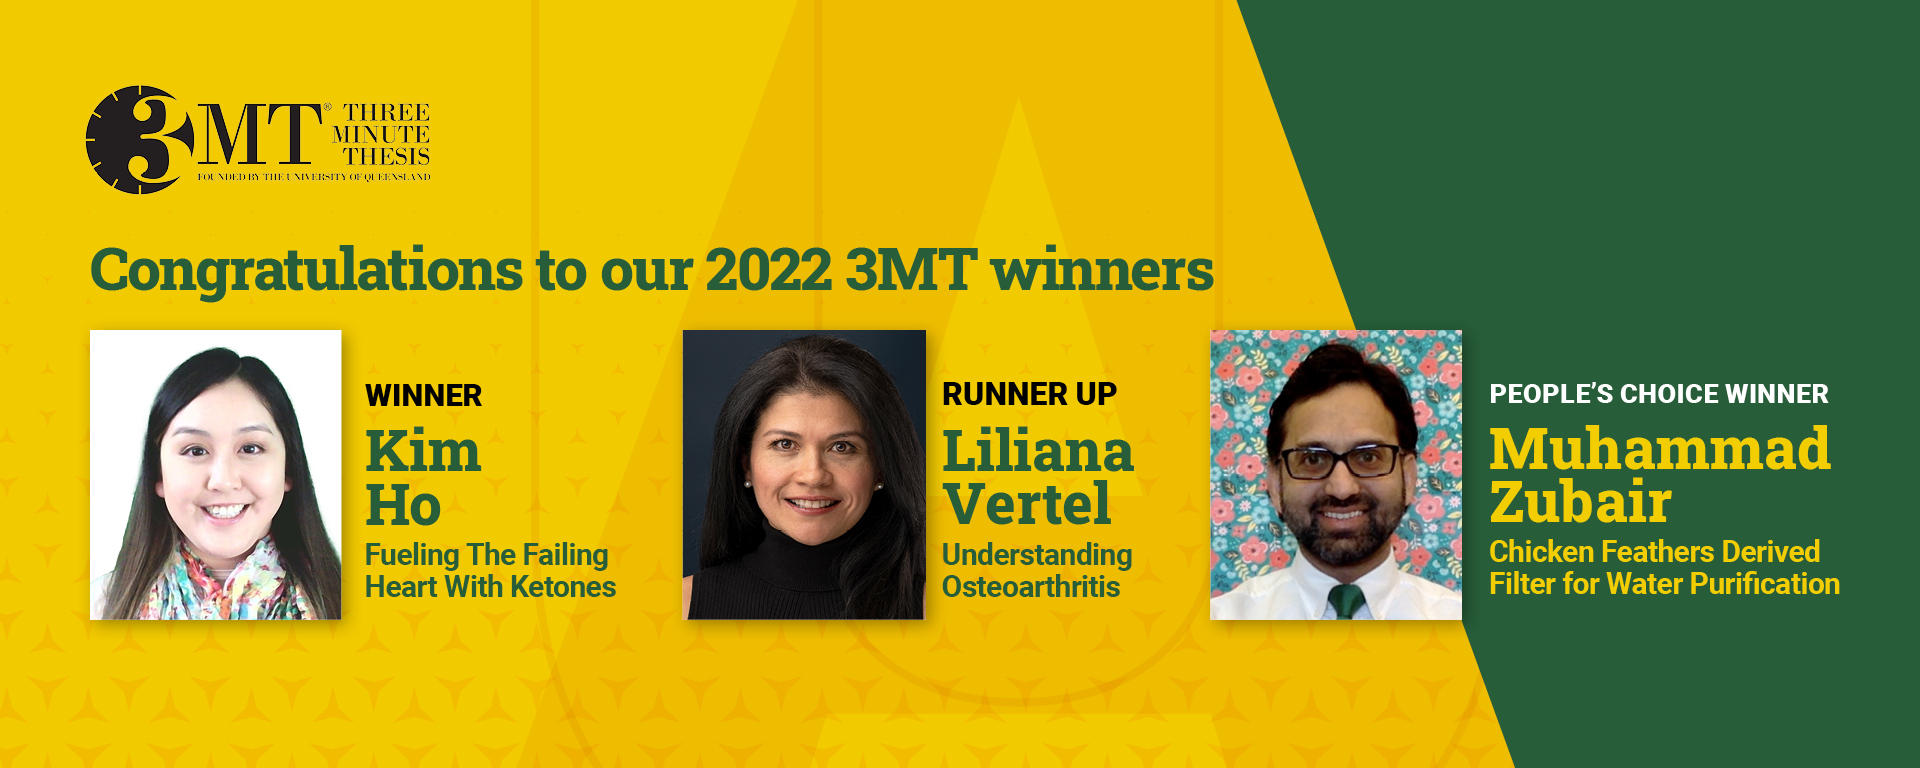 Three Minute Thesis 2022: Congratulations to our 2022 3MT winners